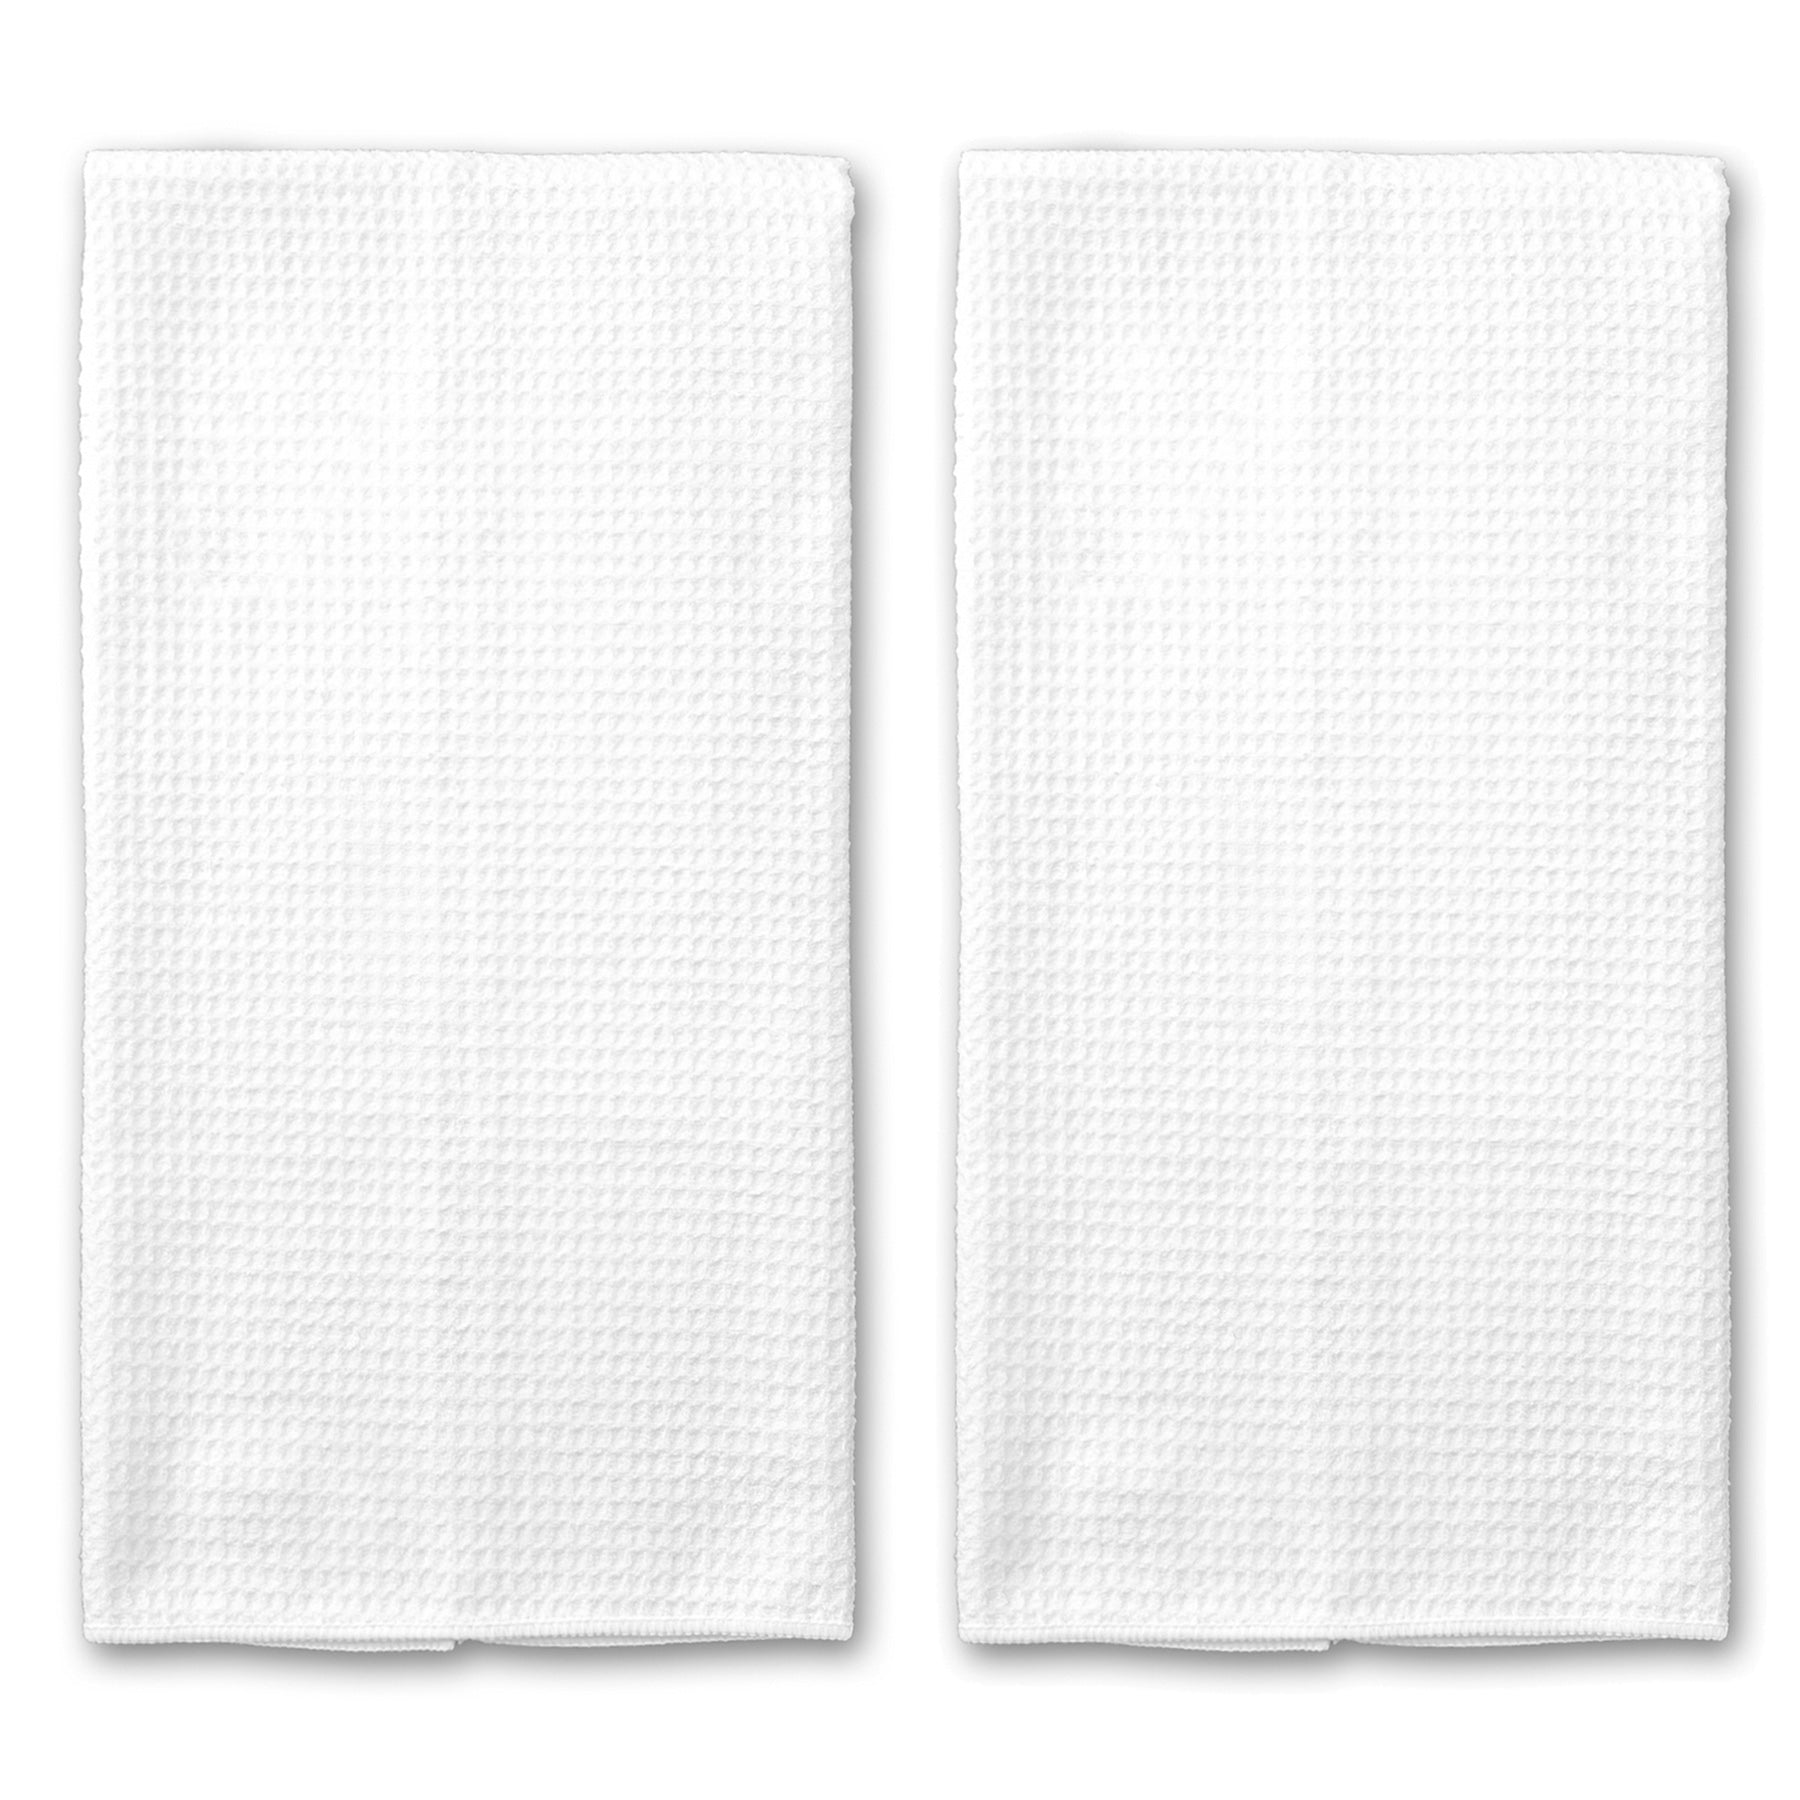  Kitchen Towels - Microfiber Waffle Weave Towels, 16 x 16 in.  (6 Pack), Absorbent, No Lint, Thick, Reusable, Commercial, Soft, Hand, Tea,  Glass, Bar, Sublimation Blank, Polyester Cloths